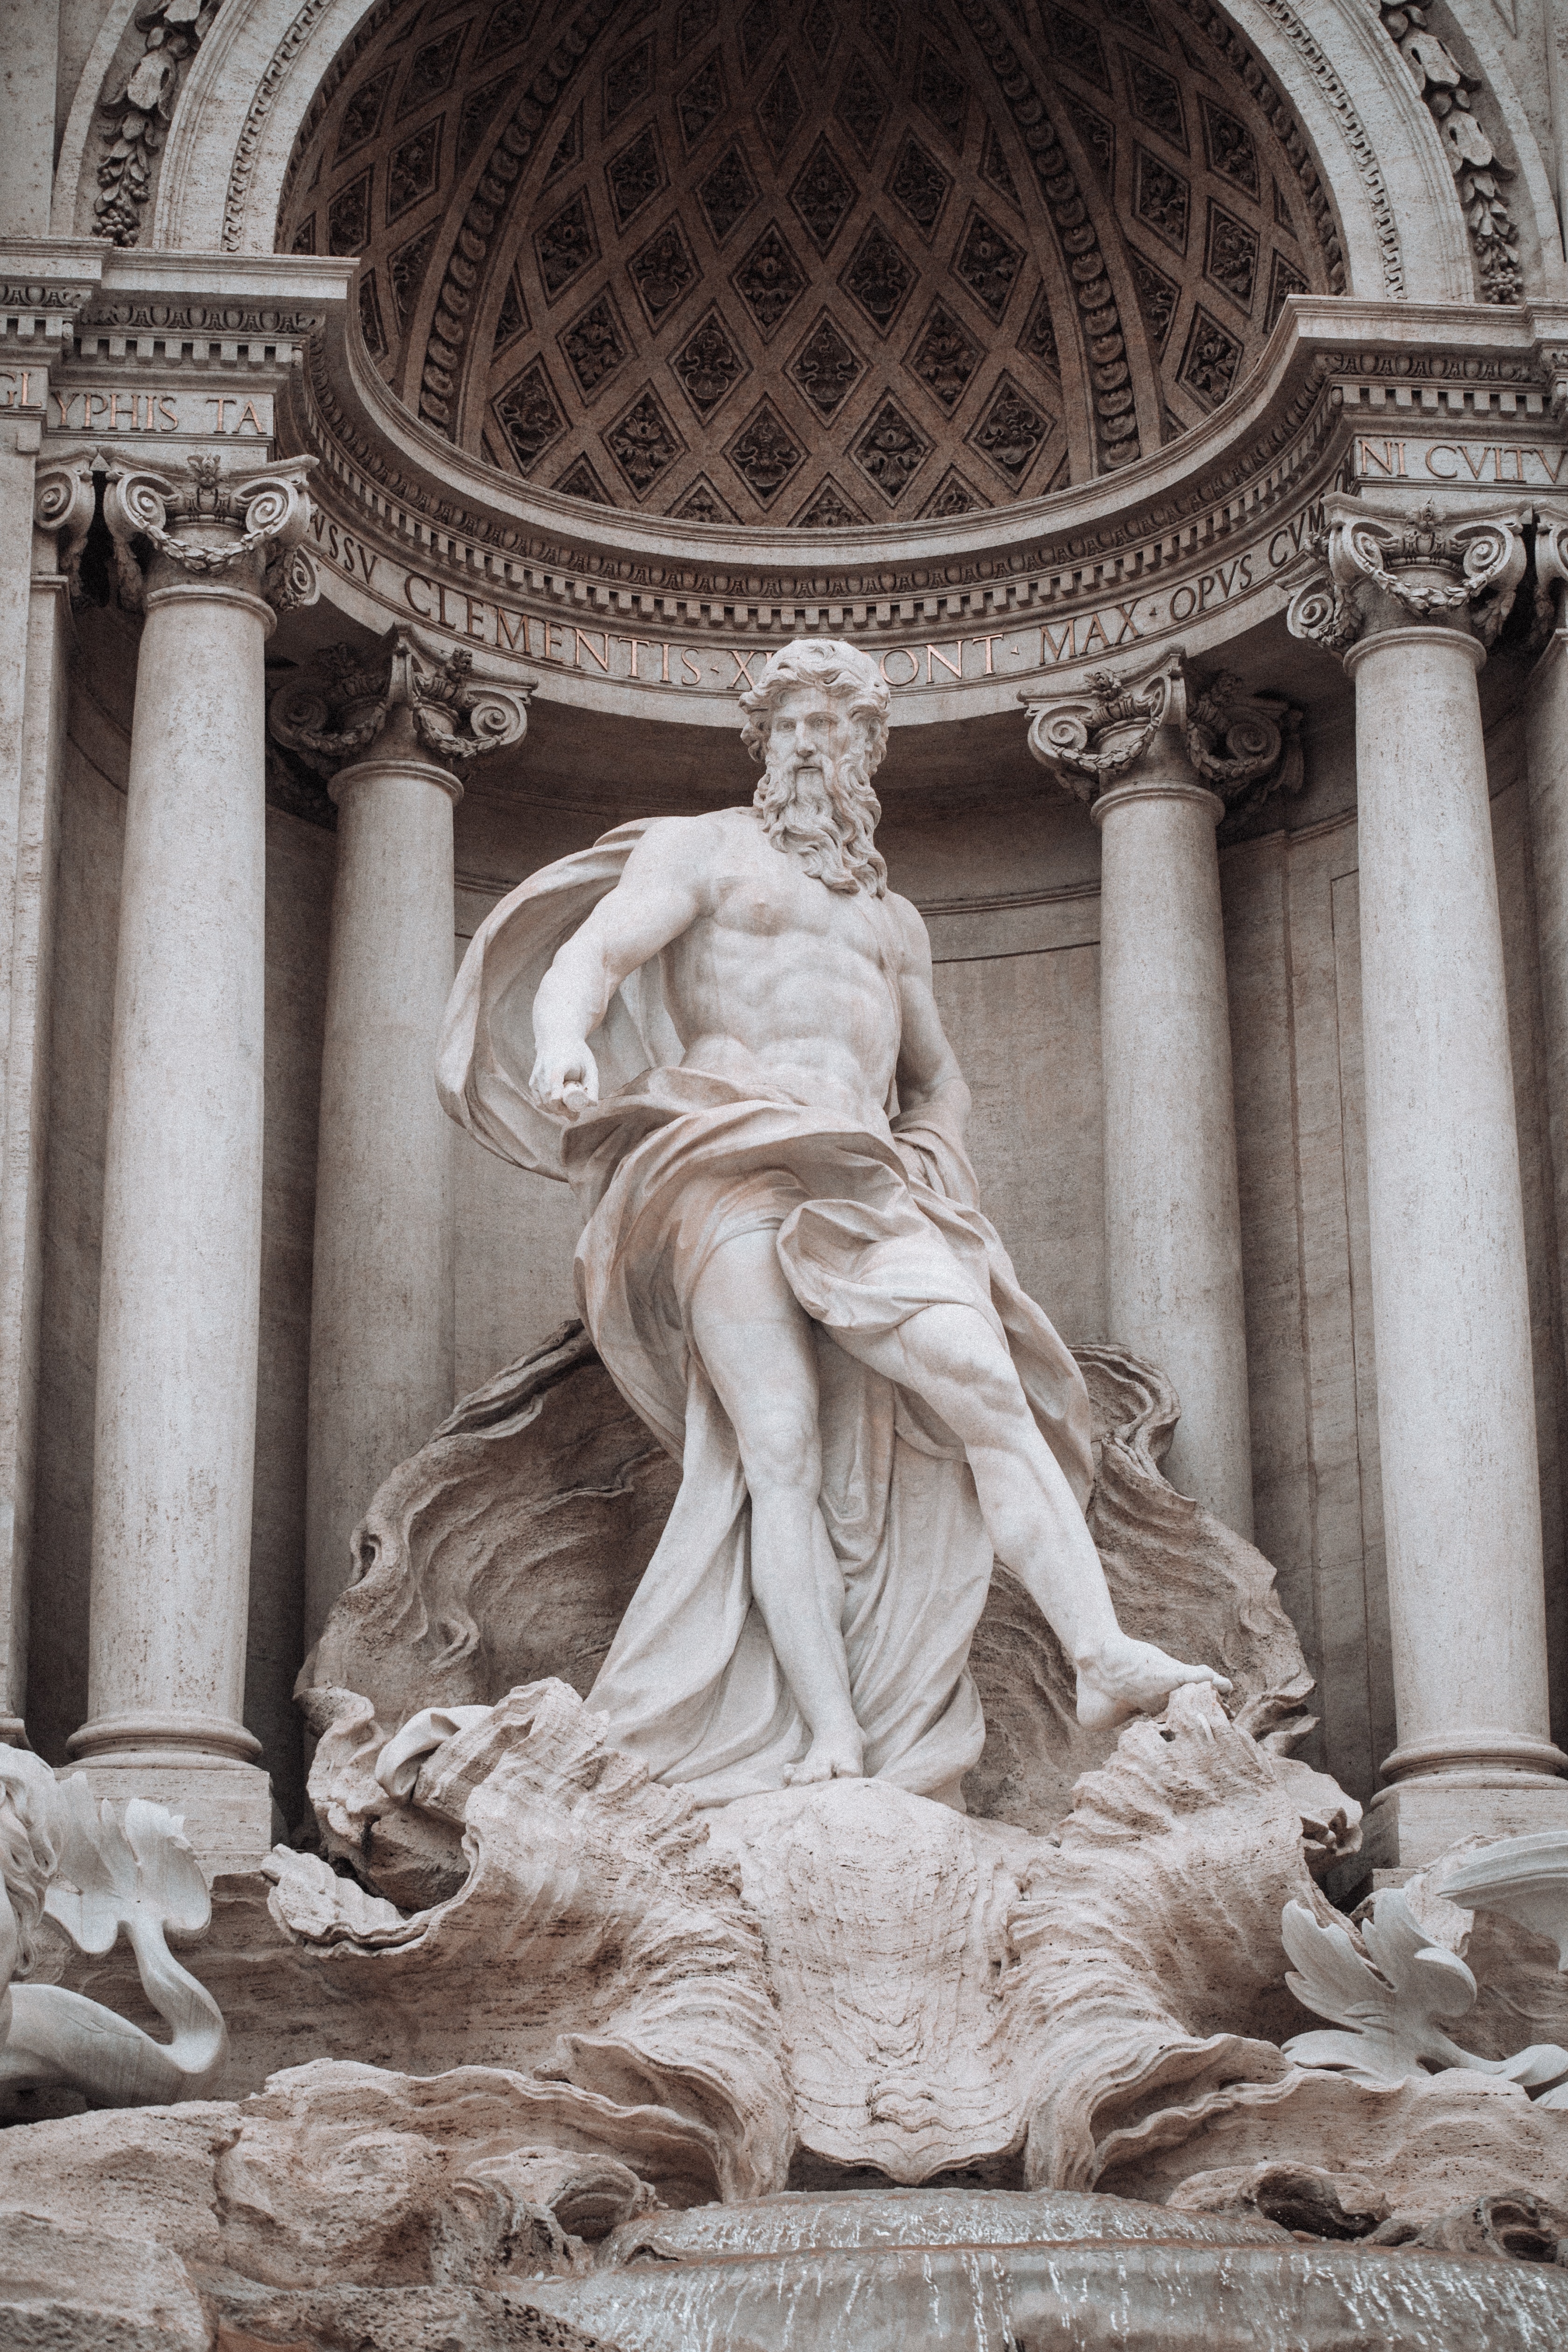 The beautiful statue of Neptune in the middle of the fountain. - Greek statue, Greek mythology